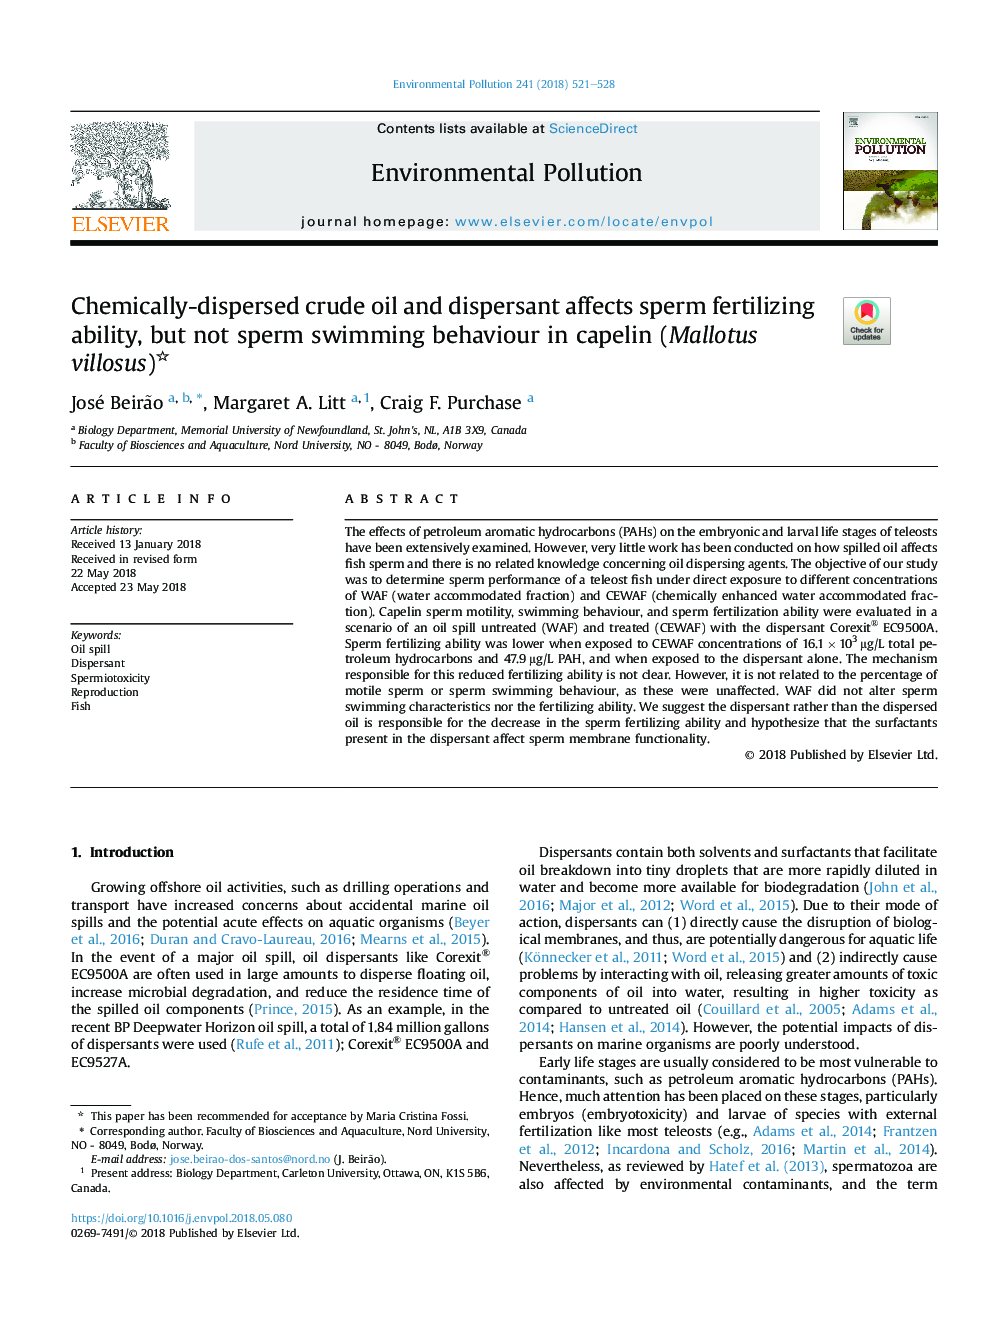 Chemically-dispersed crude oil and dispersant affects sperm fertilizing ability, but not sperm swimming behaviour in capelin (Mallotus villosus)